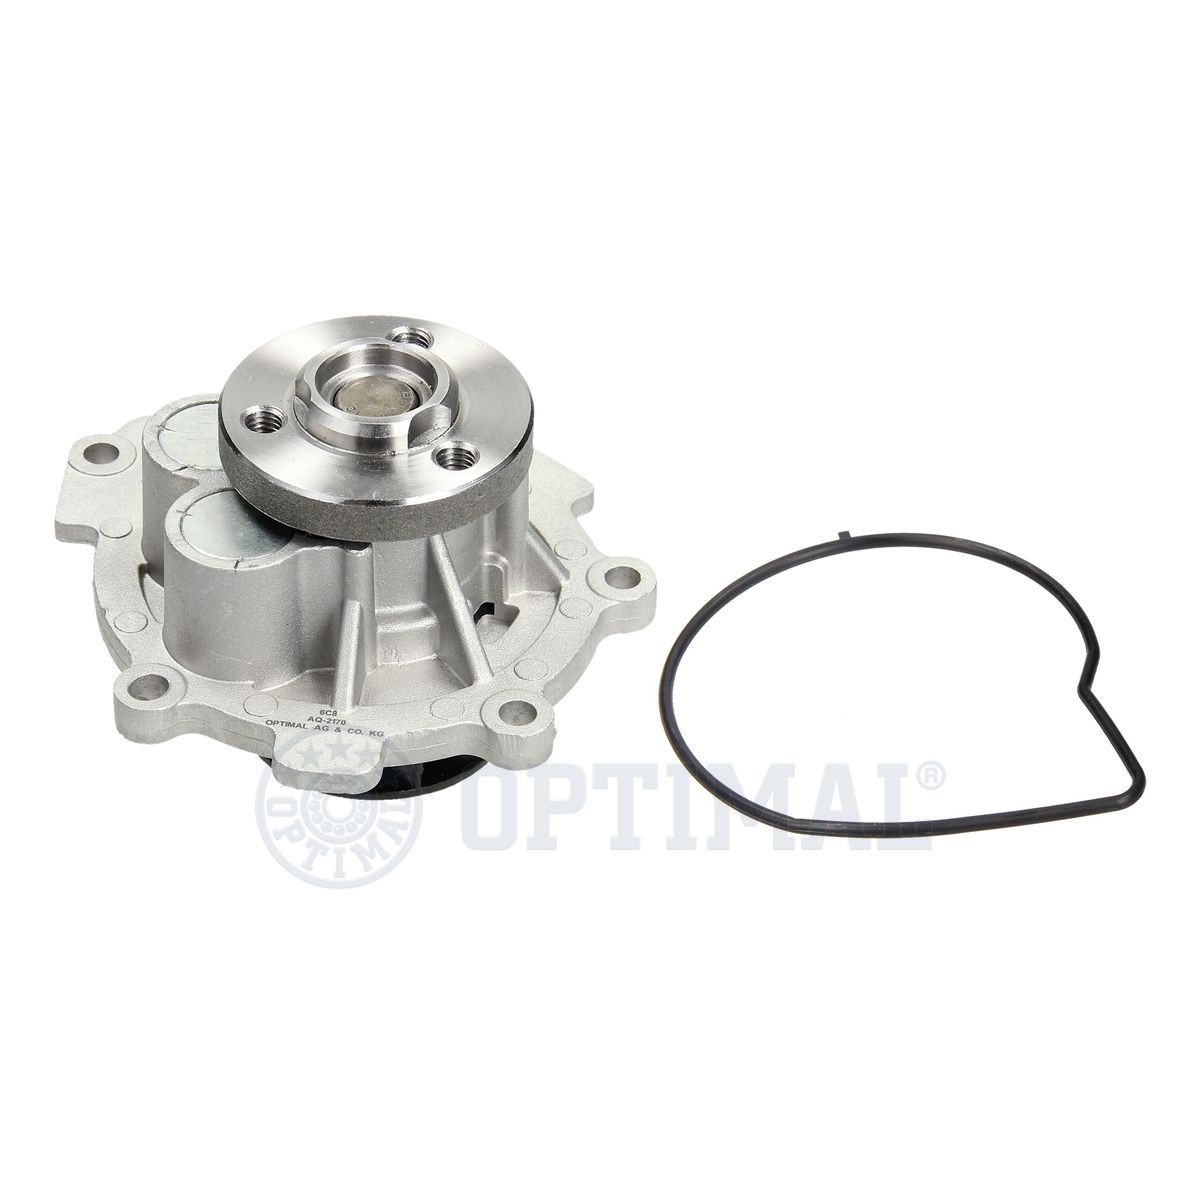 OPTIMAL Water pump for engine AQ-2170